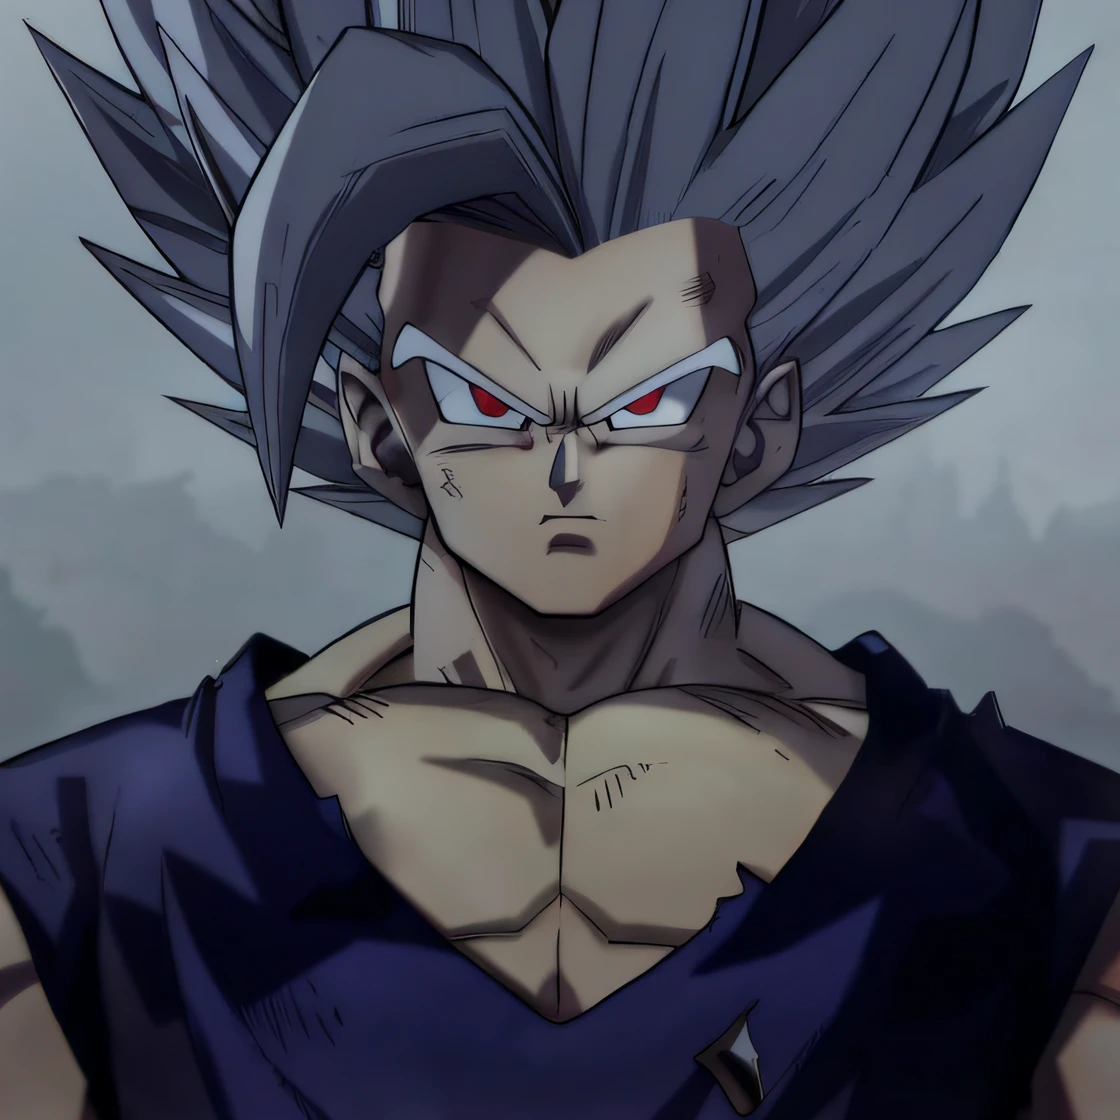 a close up of a person with a very large chest and a very large chest, ultra instinct, wild spiky black saiyan hair, he has dark gray hair, 坏蛋动漫8 K, with vegeta head hair, he's very menacing and evil, vegeta, marvelous expression, character dragonball, Gogeta, super saiyan, human goku